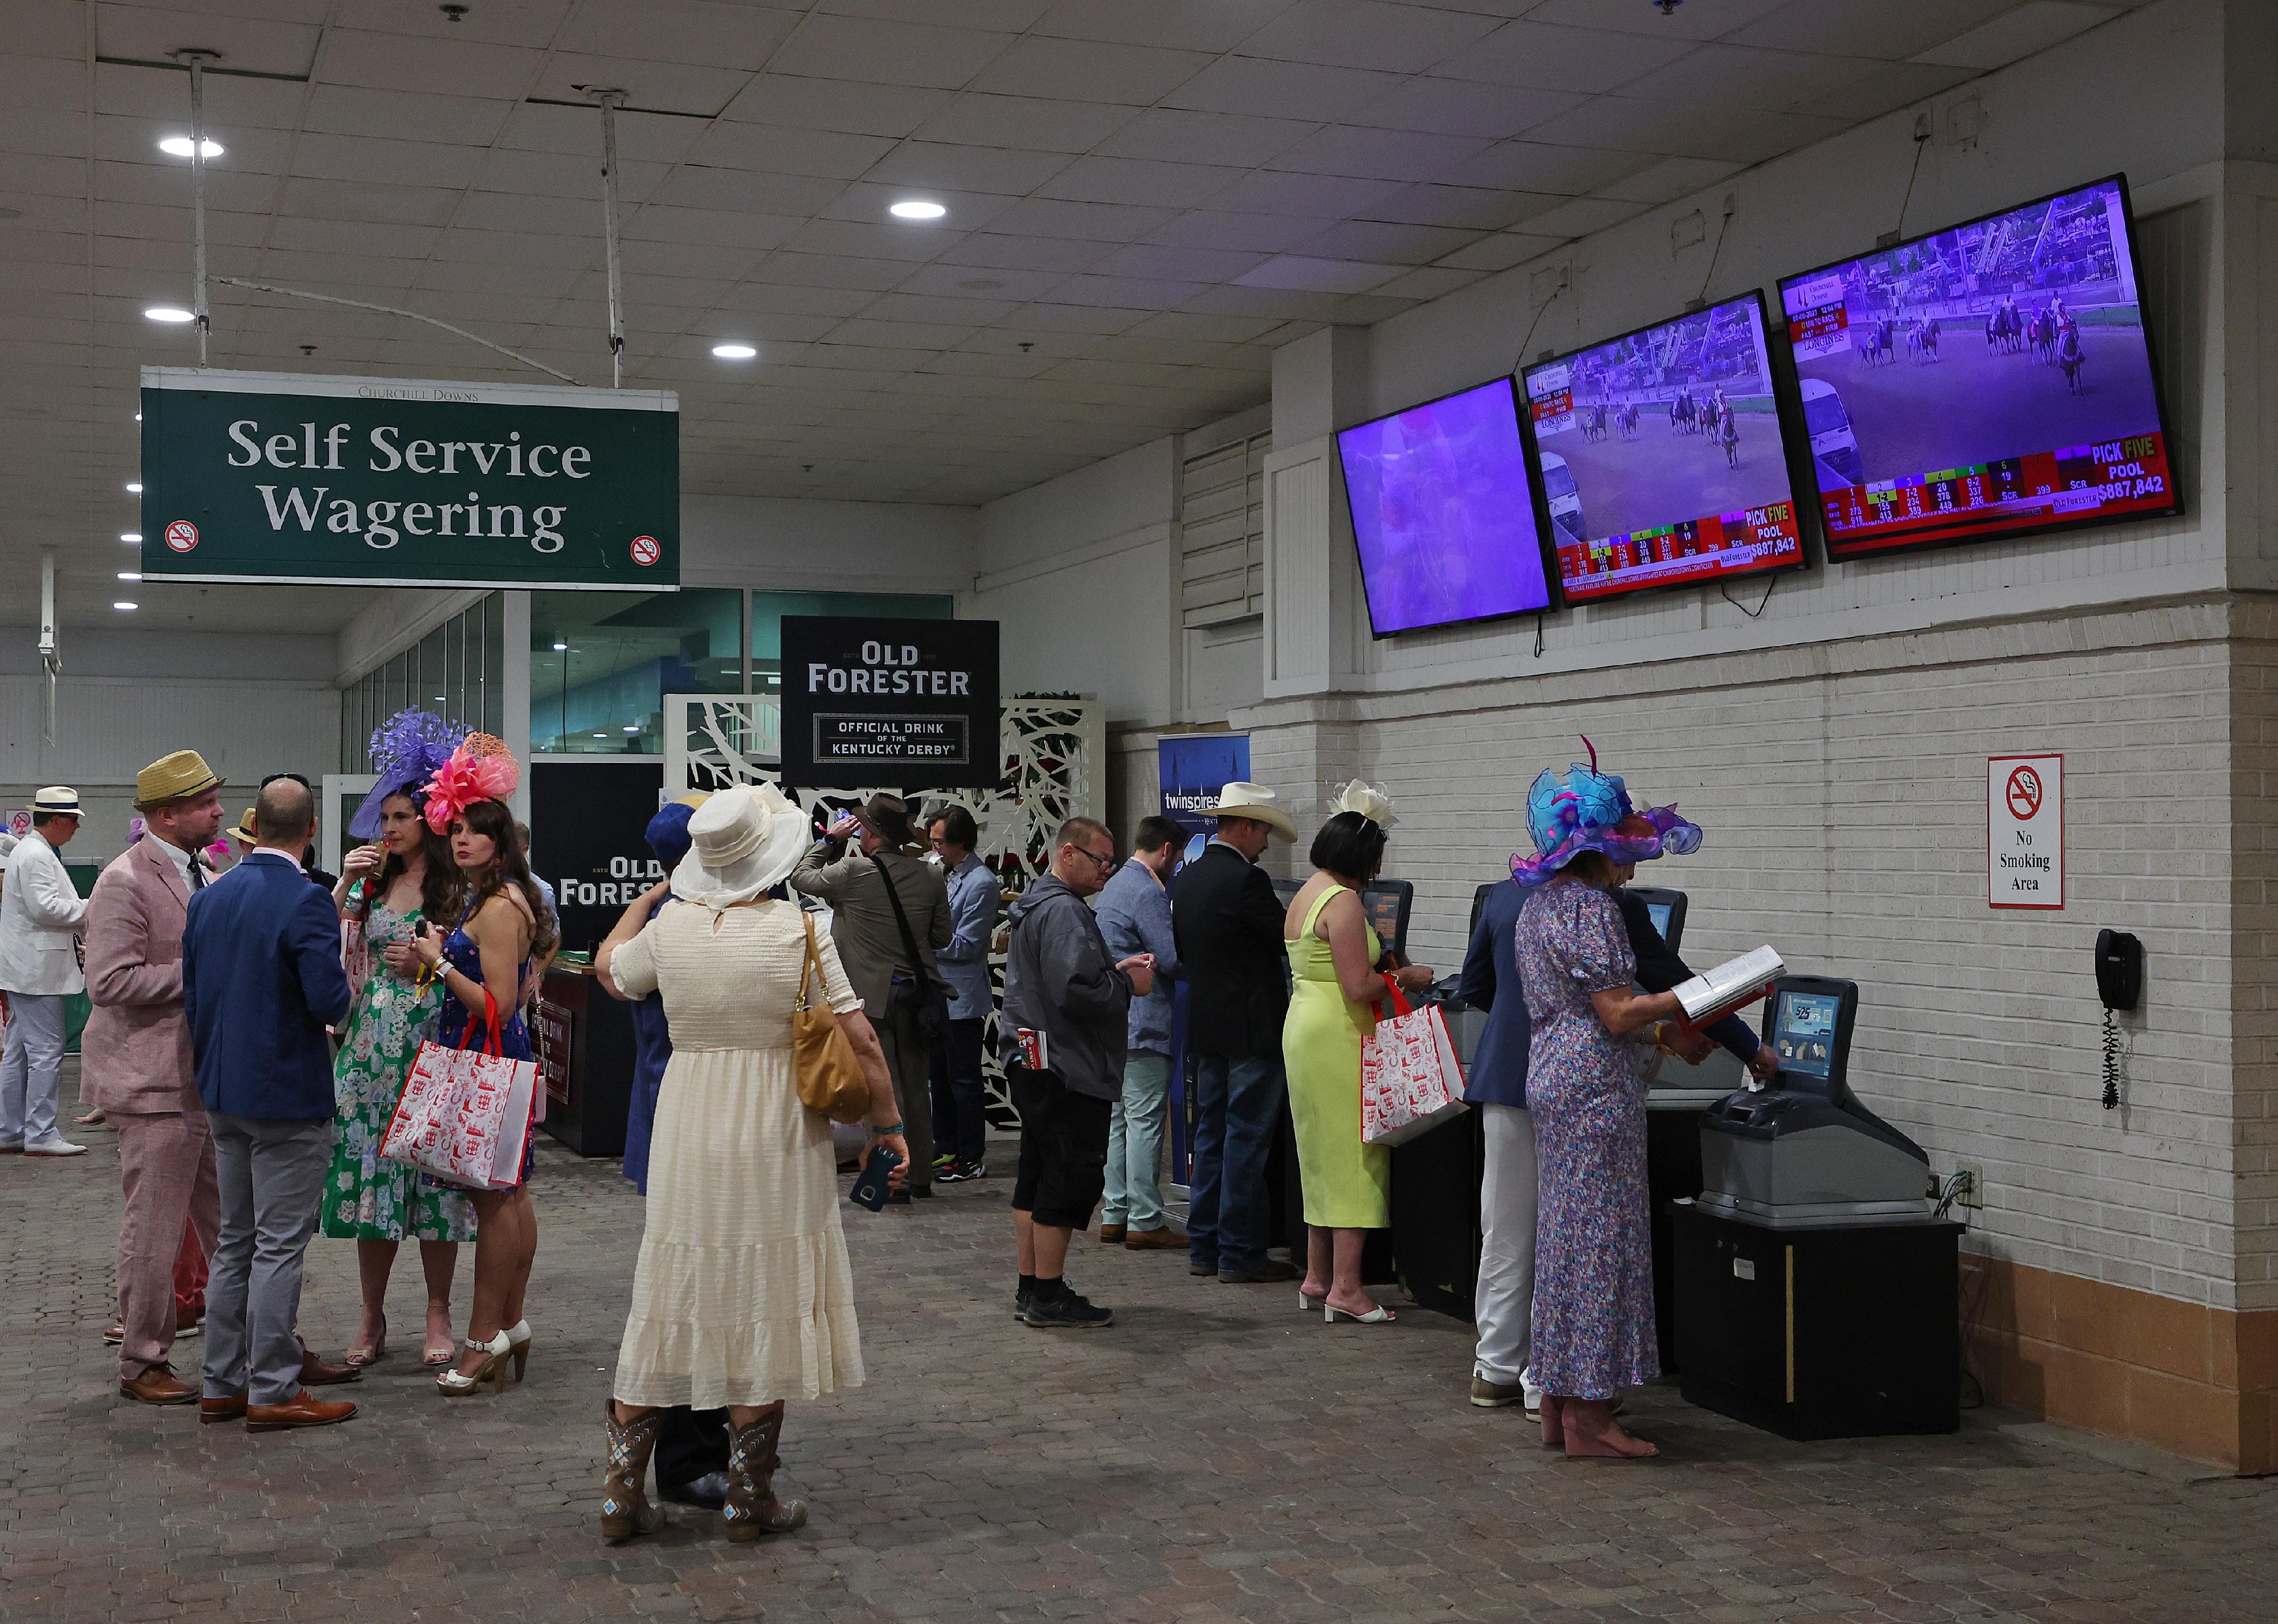 Spectators wait in line to wager on races prior to the 149th running of the Kentucky Derby.